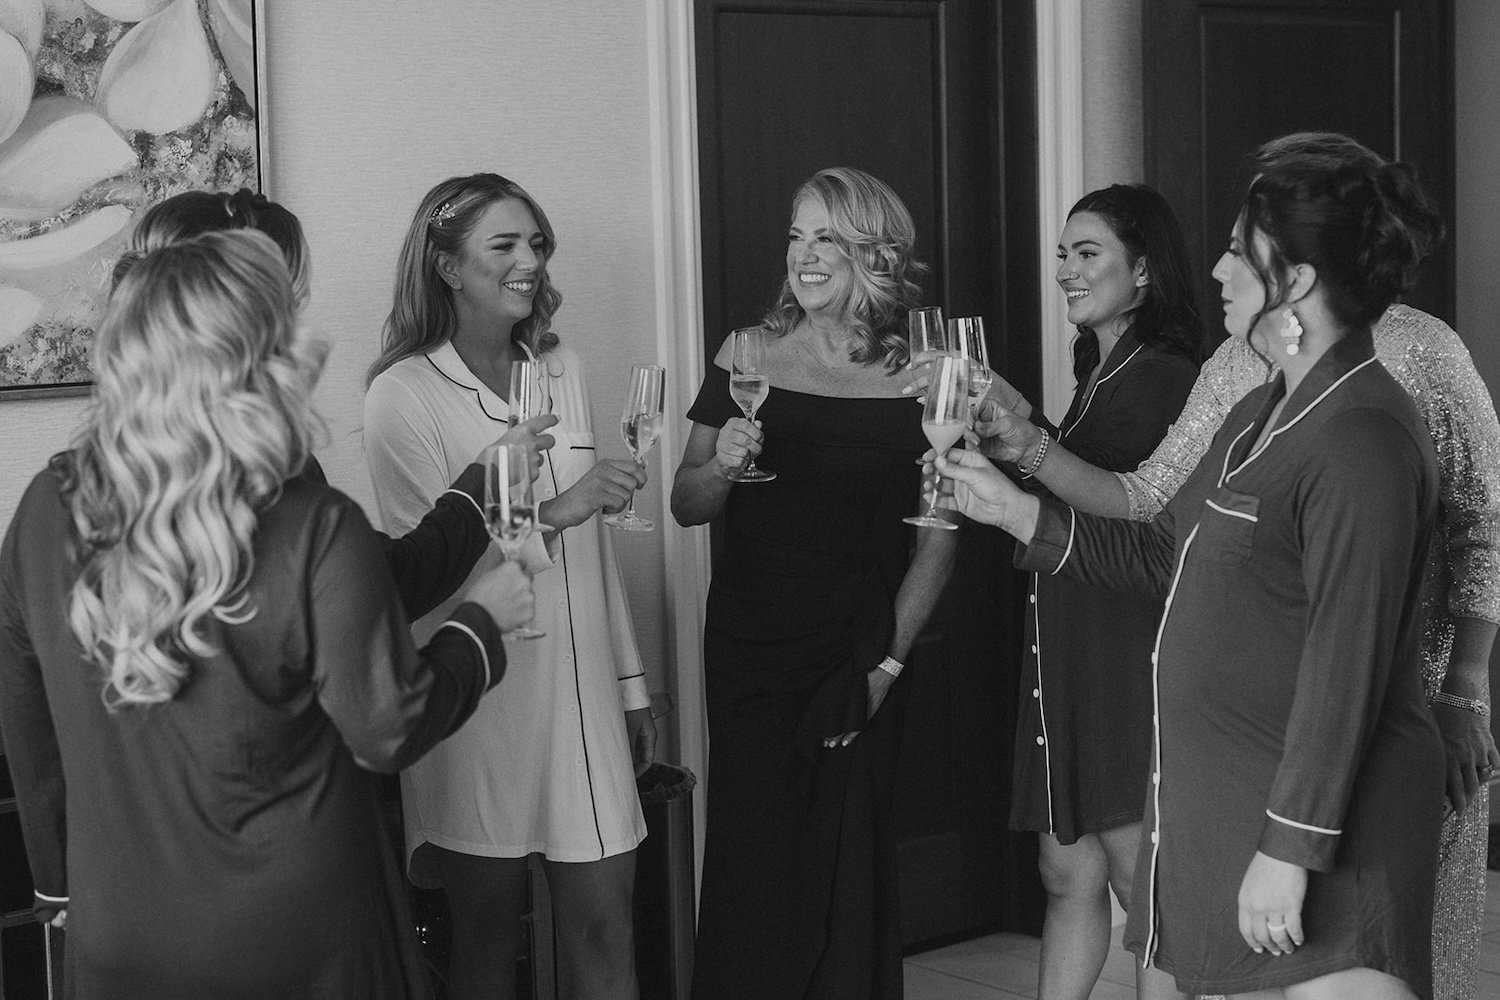 The bridal party gathers around the bride for a toast in celebration.